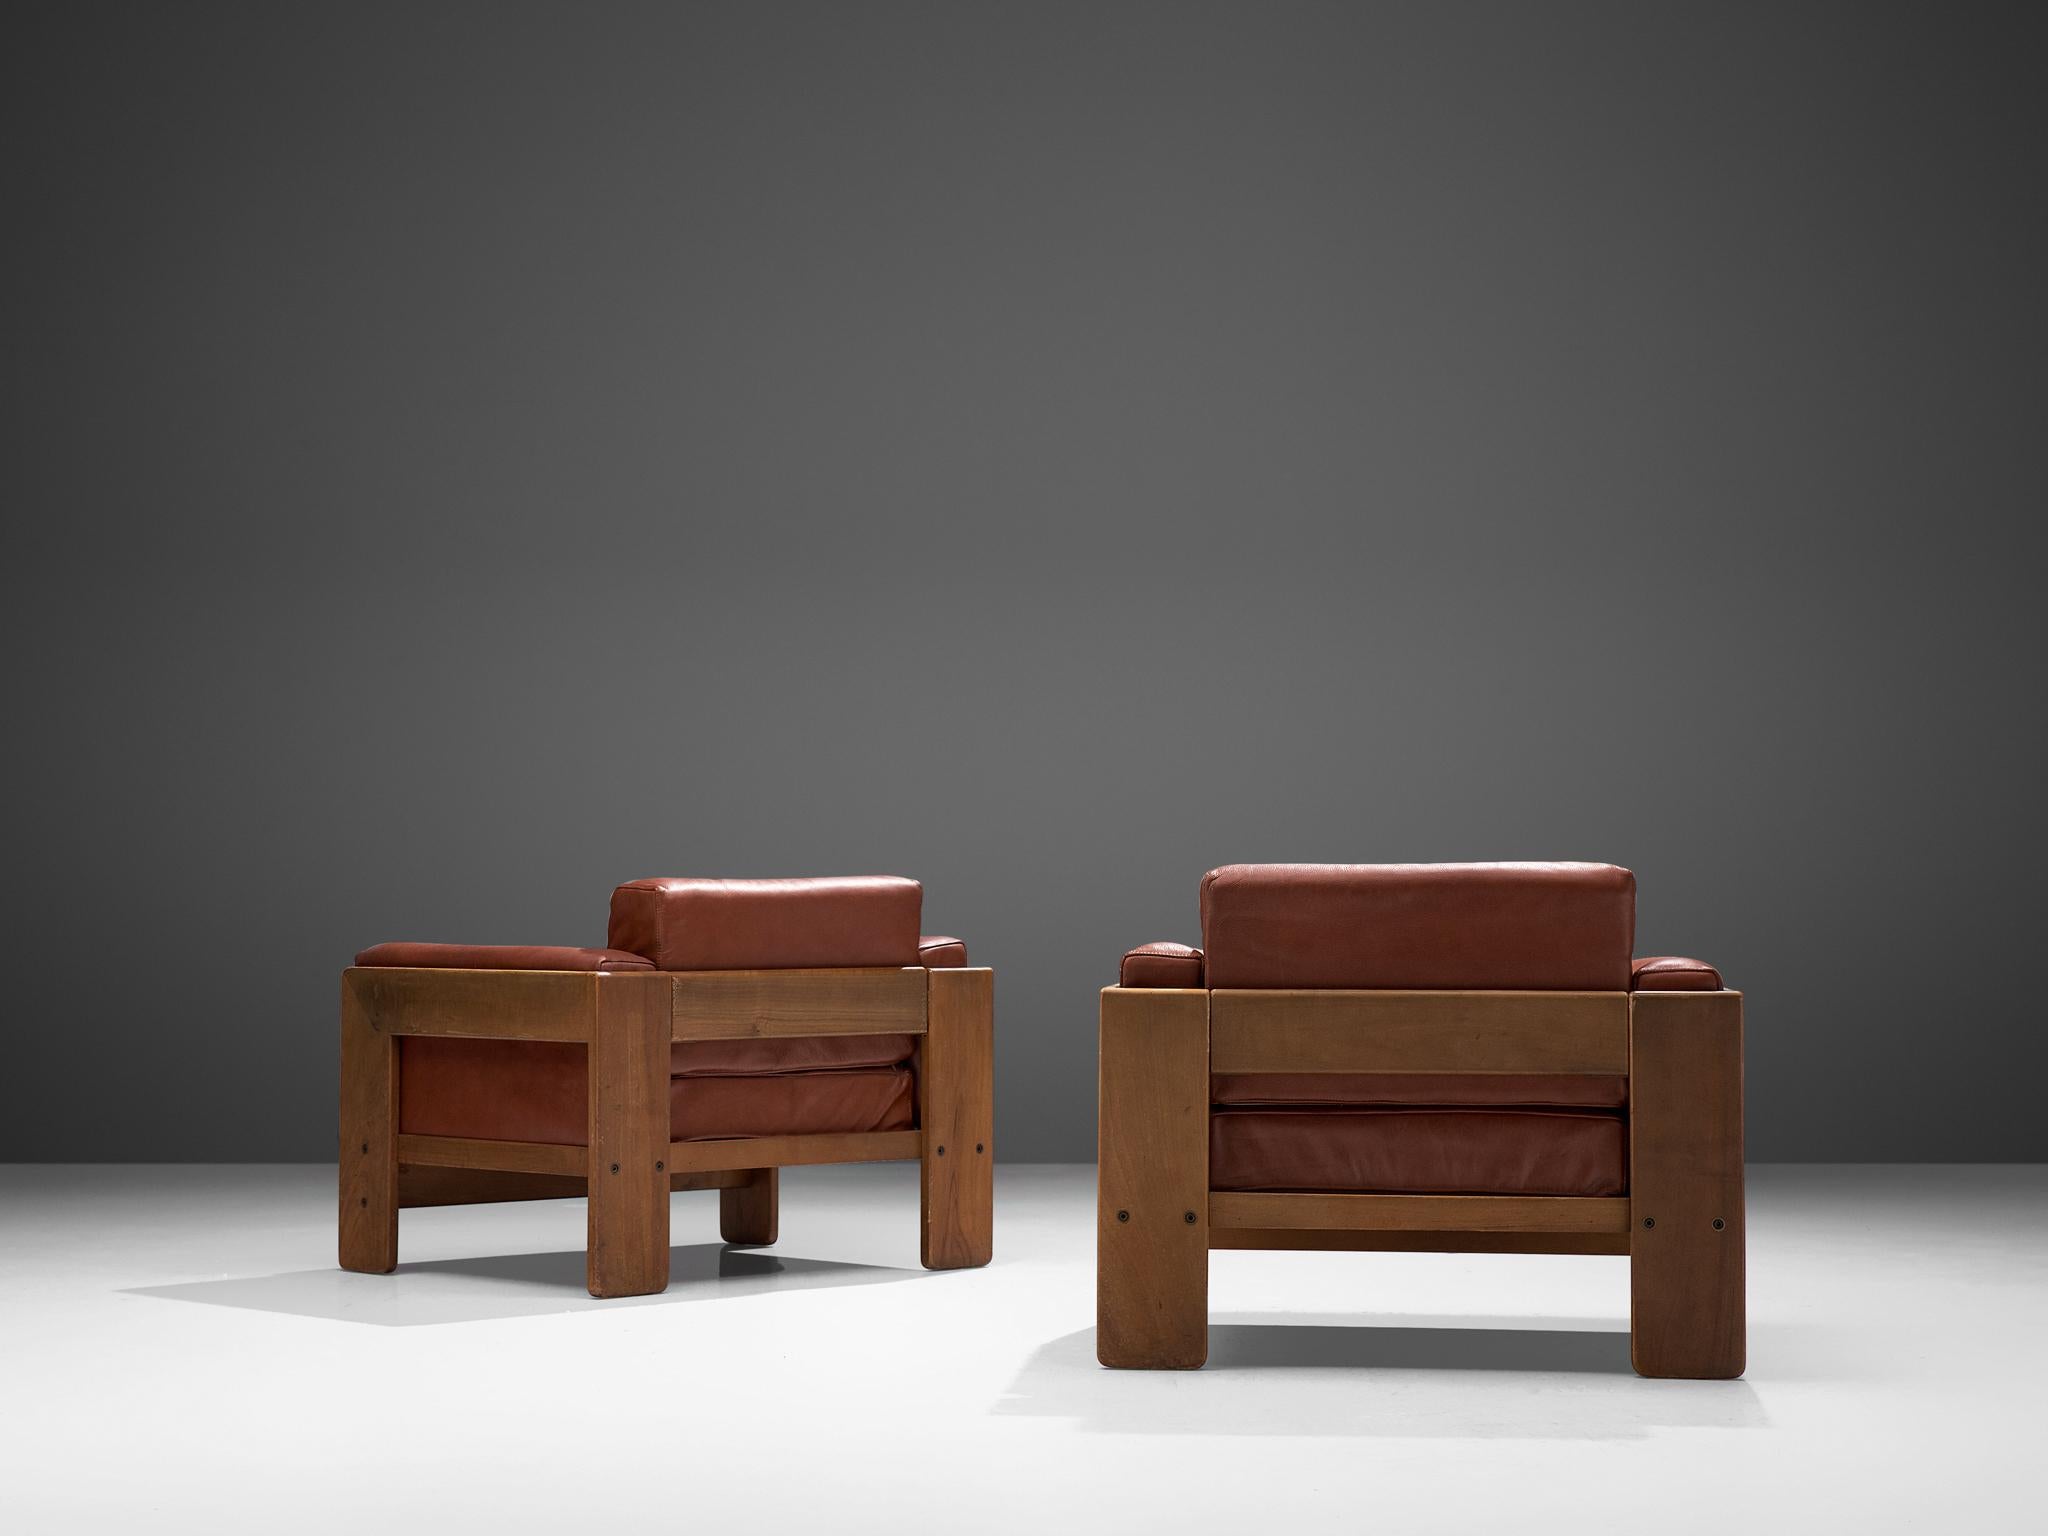 Italian Tobia Scarpa Pair of 'Bastiano' Club Chairs in Walnut and Leather